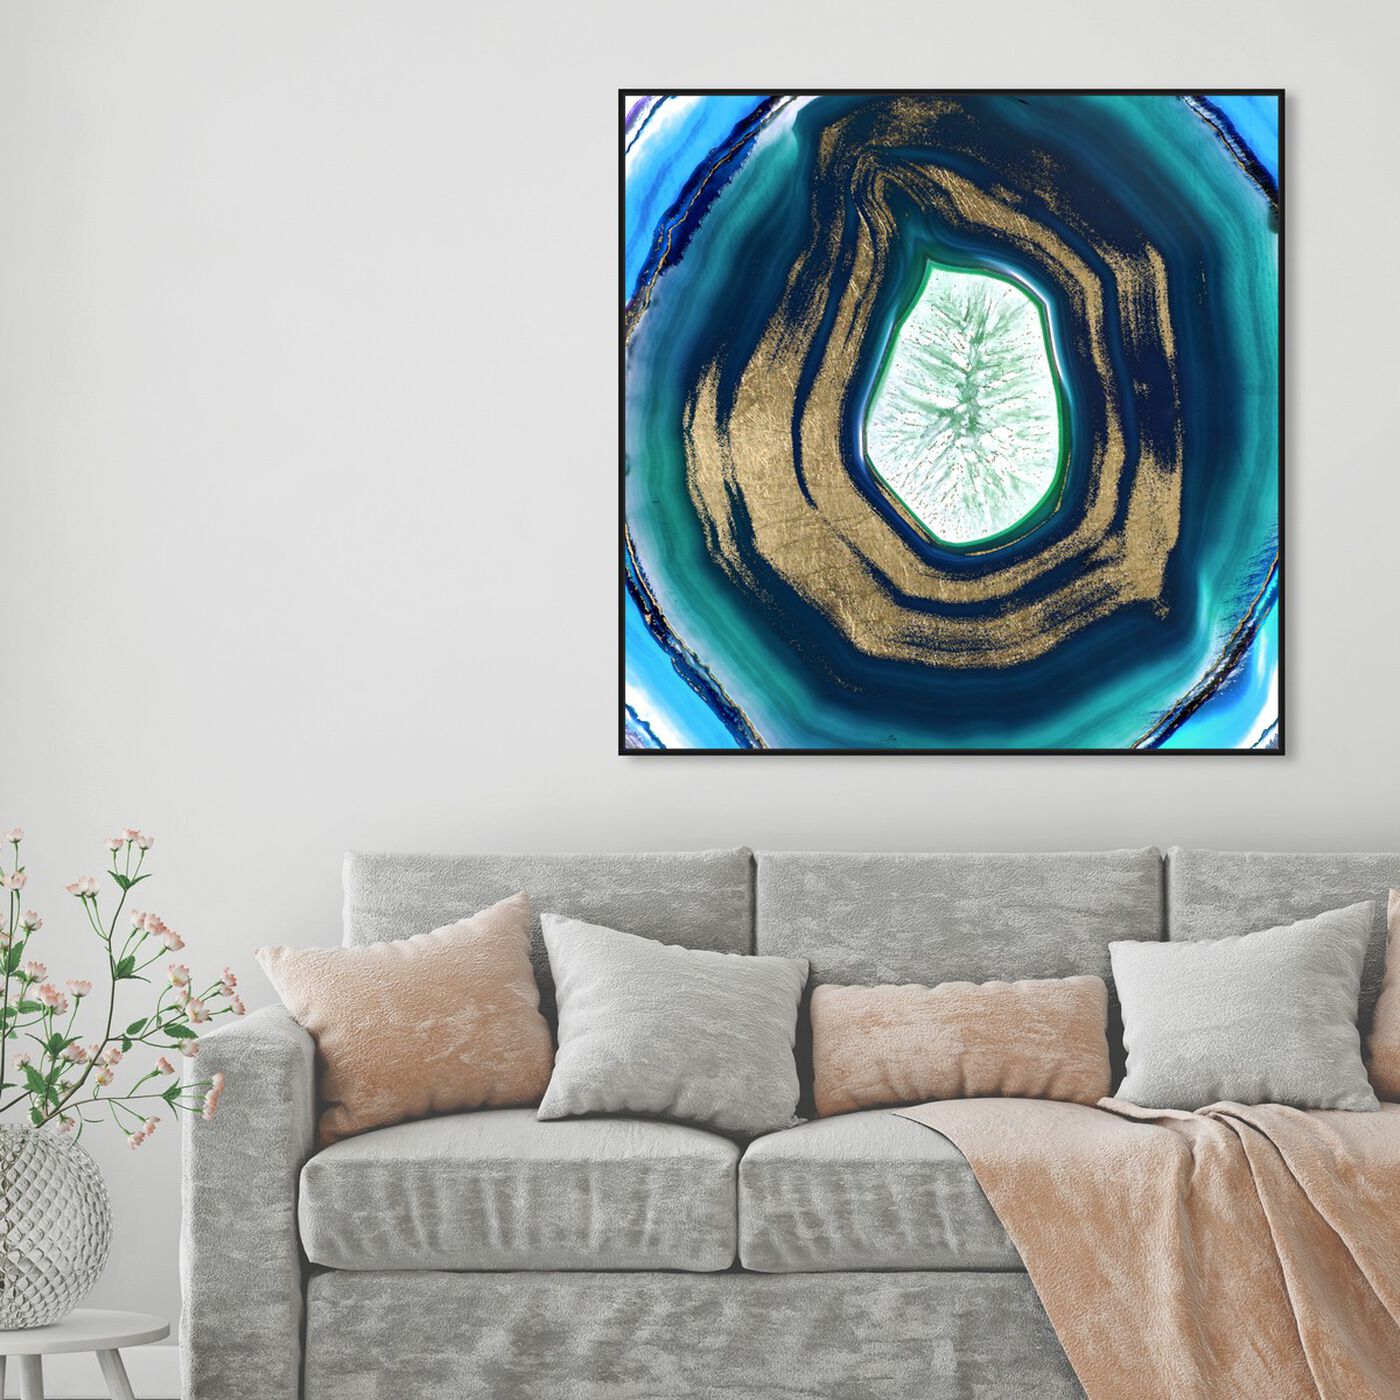 Hanging view of Bluelove Geo featuring abstract and crystals art.